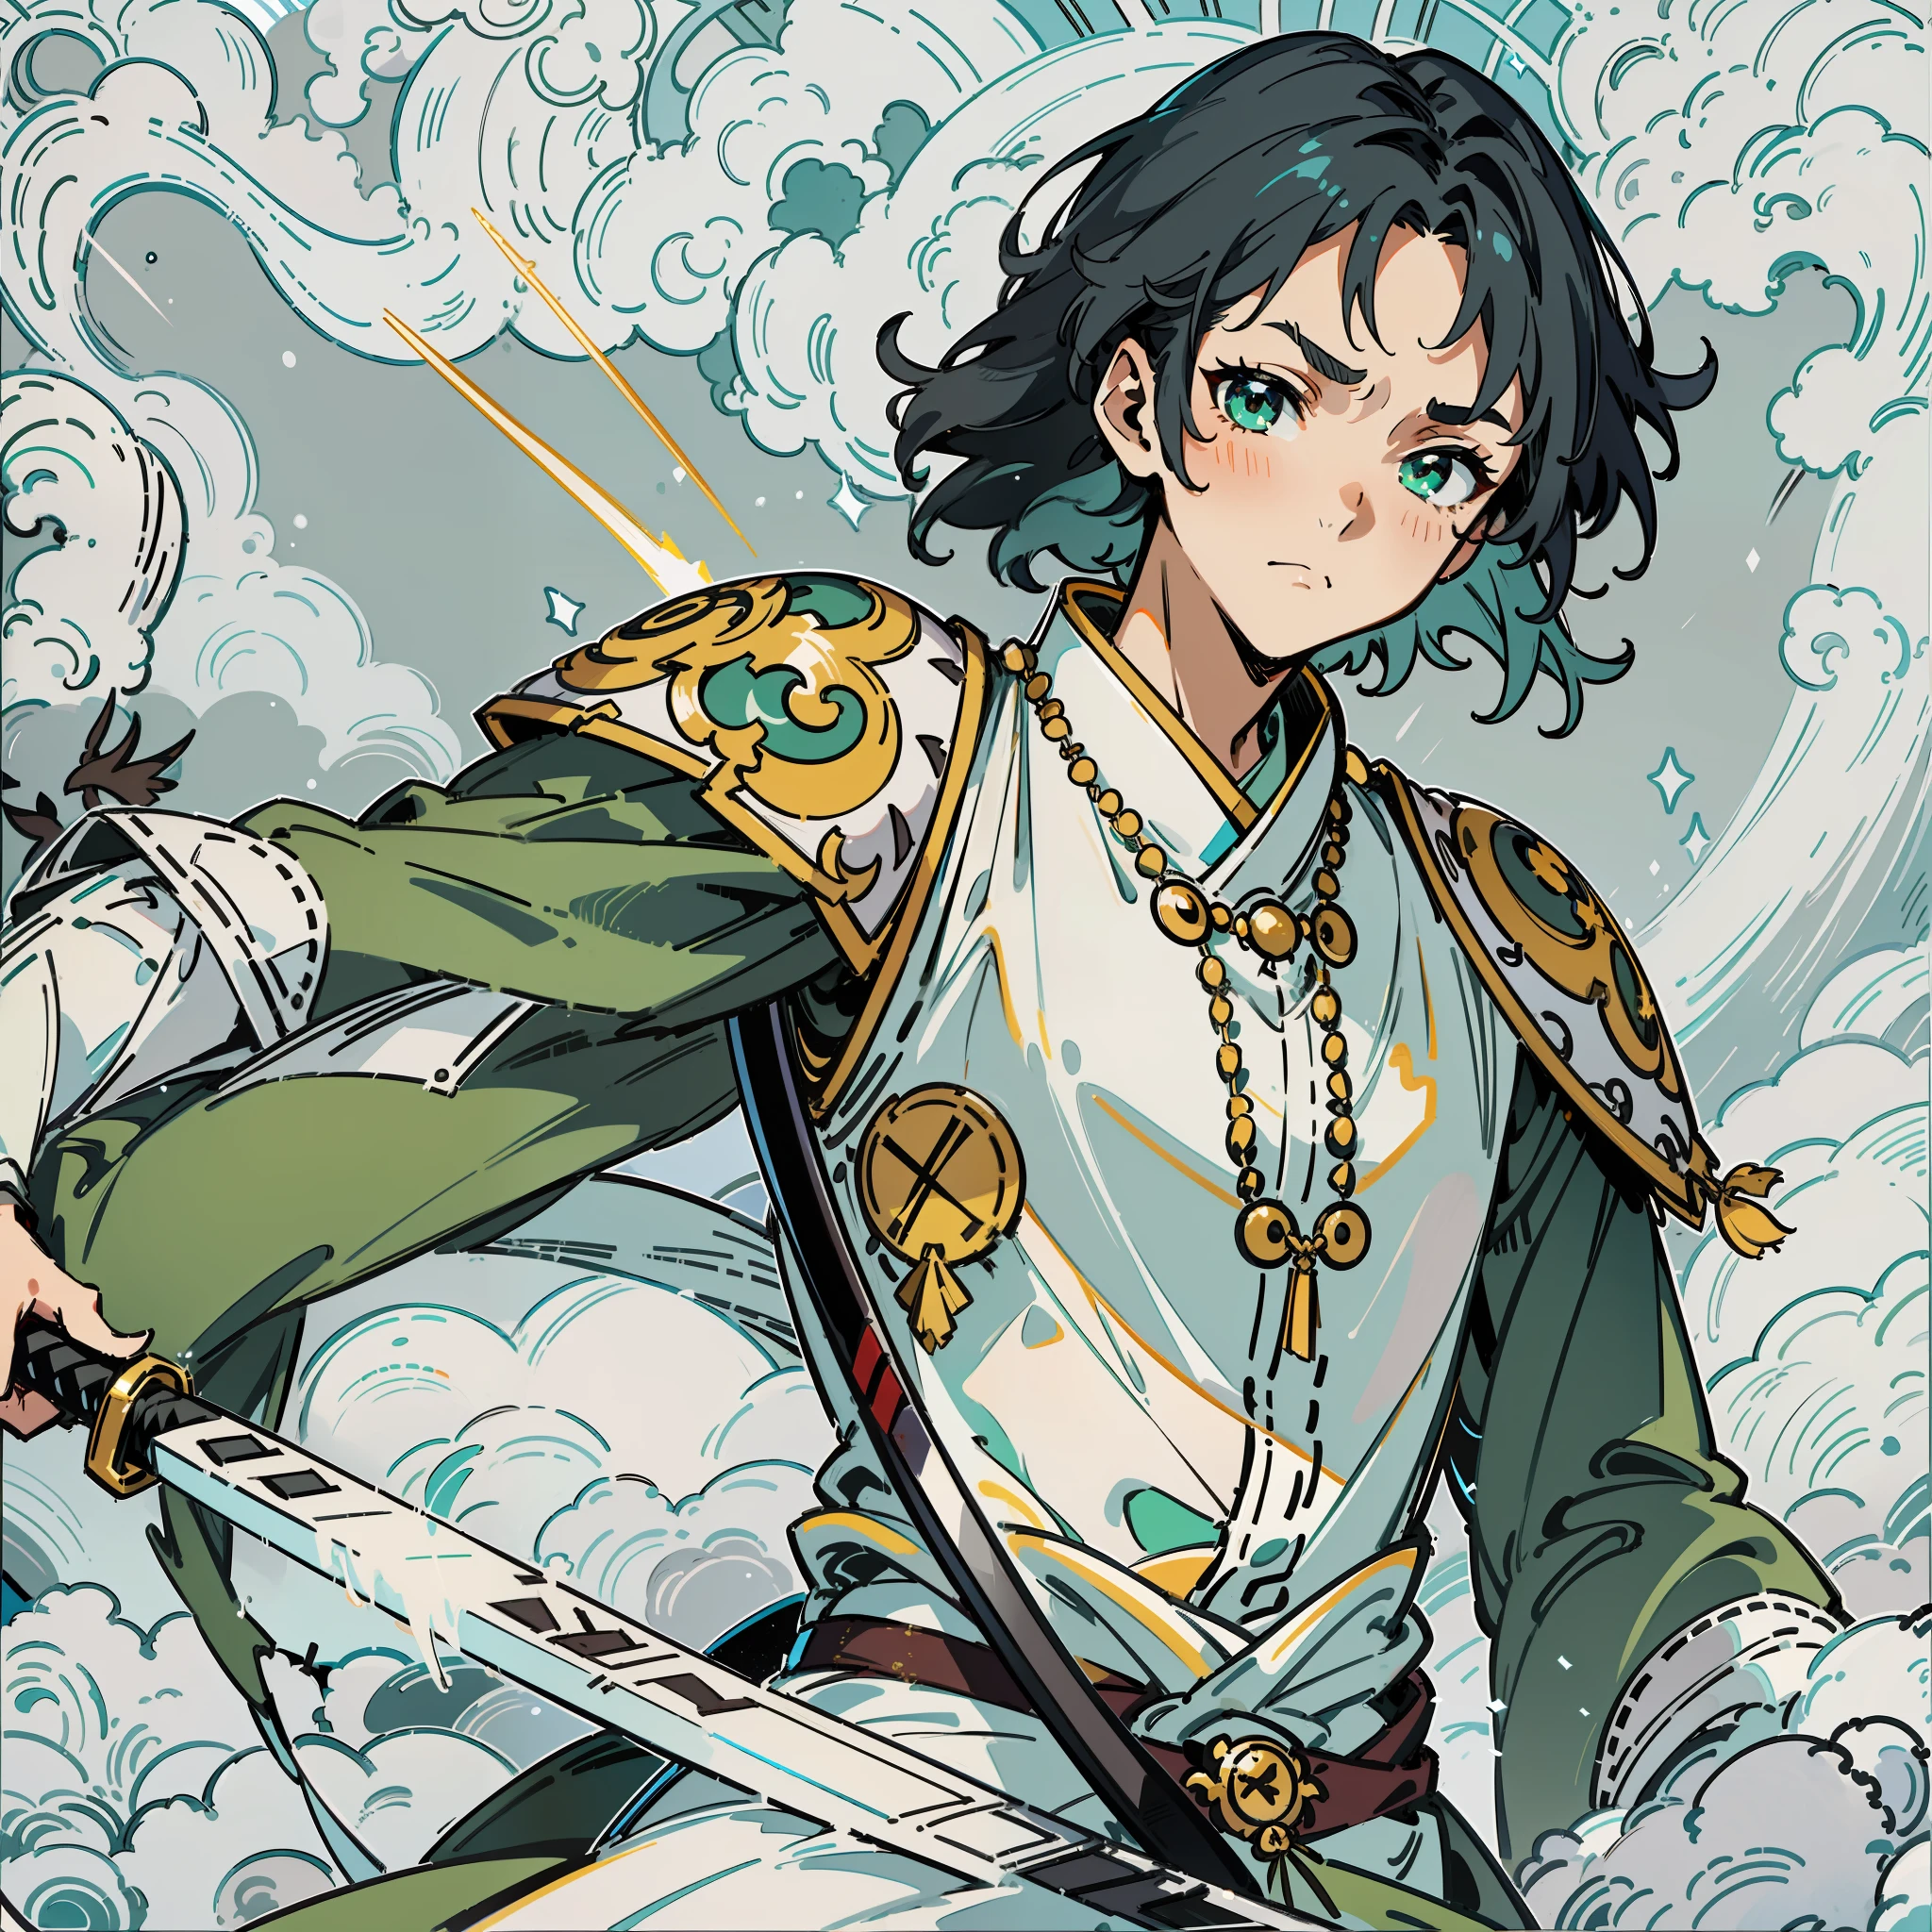 Swordsman boy, best quality (katana: 1.4), serious, (at night: 1.4), a single young man of 16 years who His hair is thick and has a healthy appearance, his hair is short, full body, on a plain with stunning scenery contrasting with his fair skin. The young man's eyes are deep and emerald green, intense as two light pearls. They reflect calm and an inquisitive curiosity. With his upright posture, the young man shows a confident bearing and a cheerful and hyperactive aura. He is shirtless and underneath wears the underside of a white and light green kimono with blue-green accents with patterned grey clouds, with a large yellow ribbon at his waist, sleeveless, made of a quality fabric. giving him the look of a swordsman. At his waist, he carries a white katana with gray details on the blade. The long and sharp blade is made of polished steel, reflecting light., crazy, cinematic lighting, ray tracing, scanlines, character chart, column lineup, border, afterimage, close-up, panorama, f/1.8, Sony FE, emphasis lines, macro photo, Hasselblad, UHD, high quality, 4K .